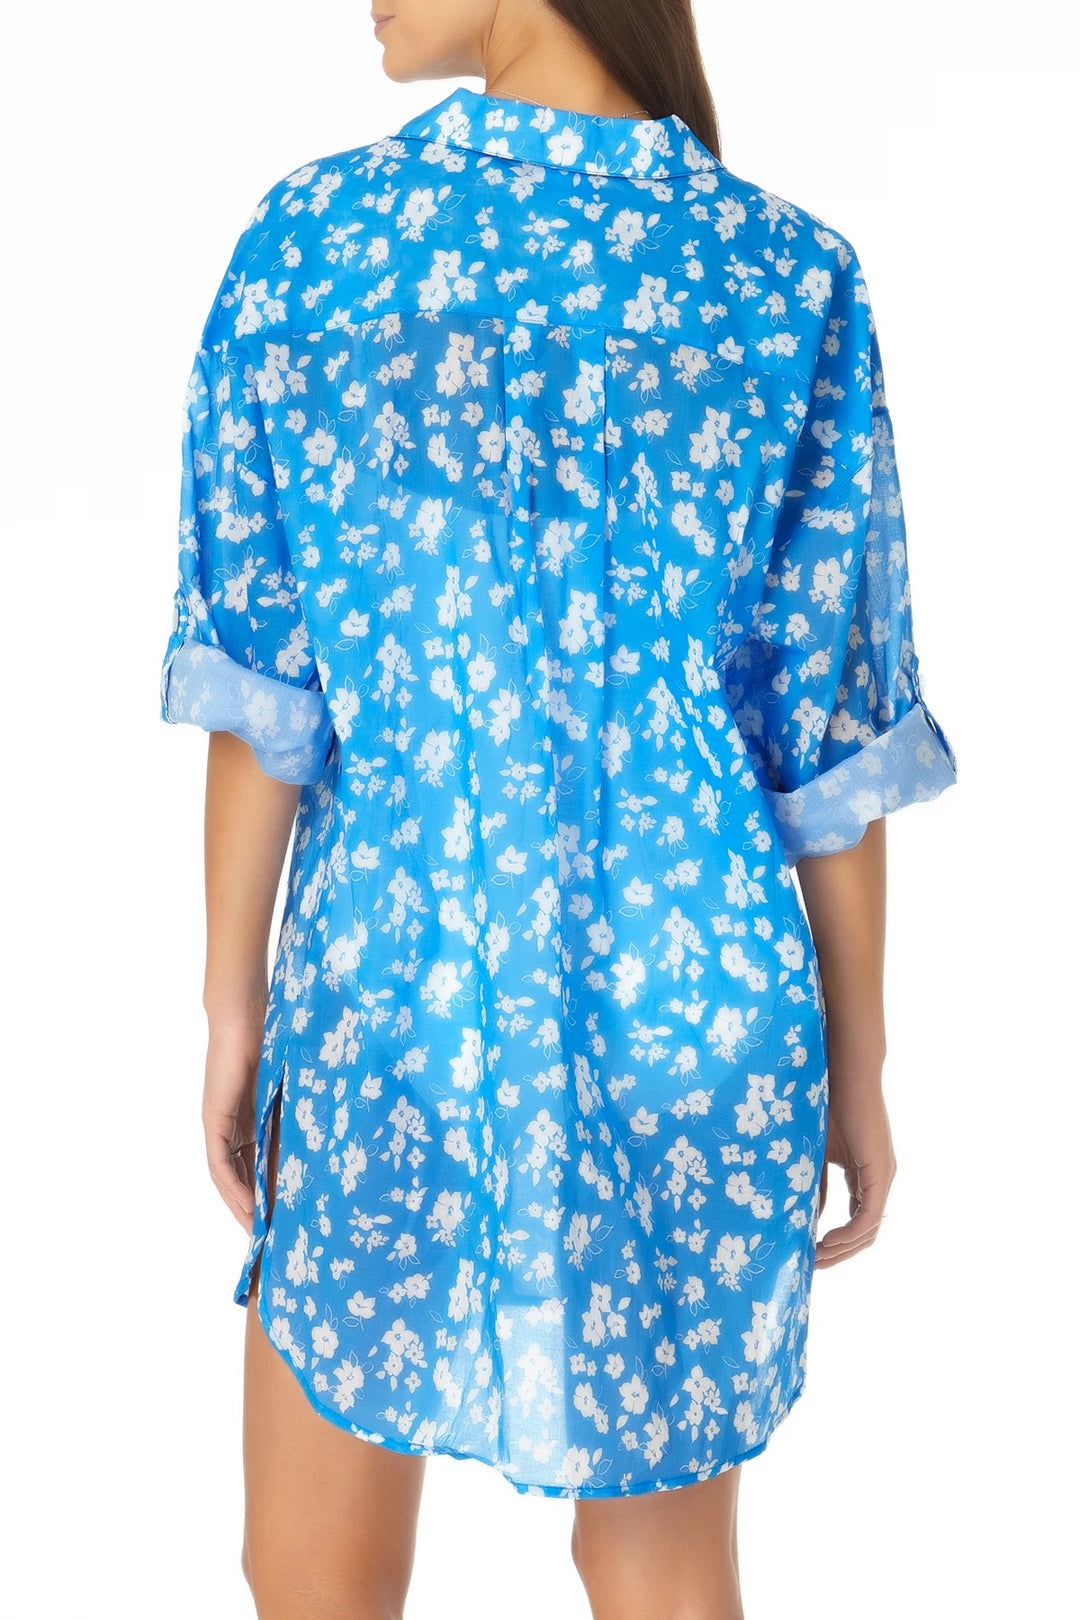 Baby Bloom Cotton Cover Up - Size Medium